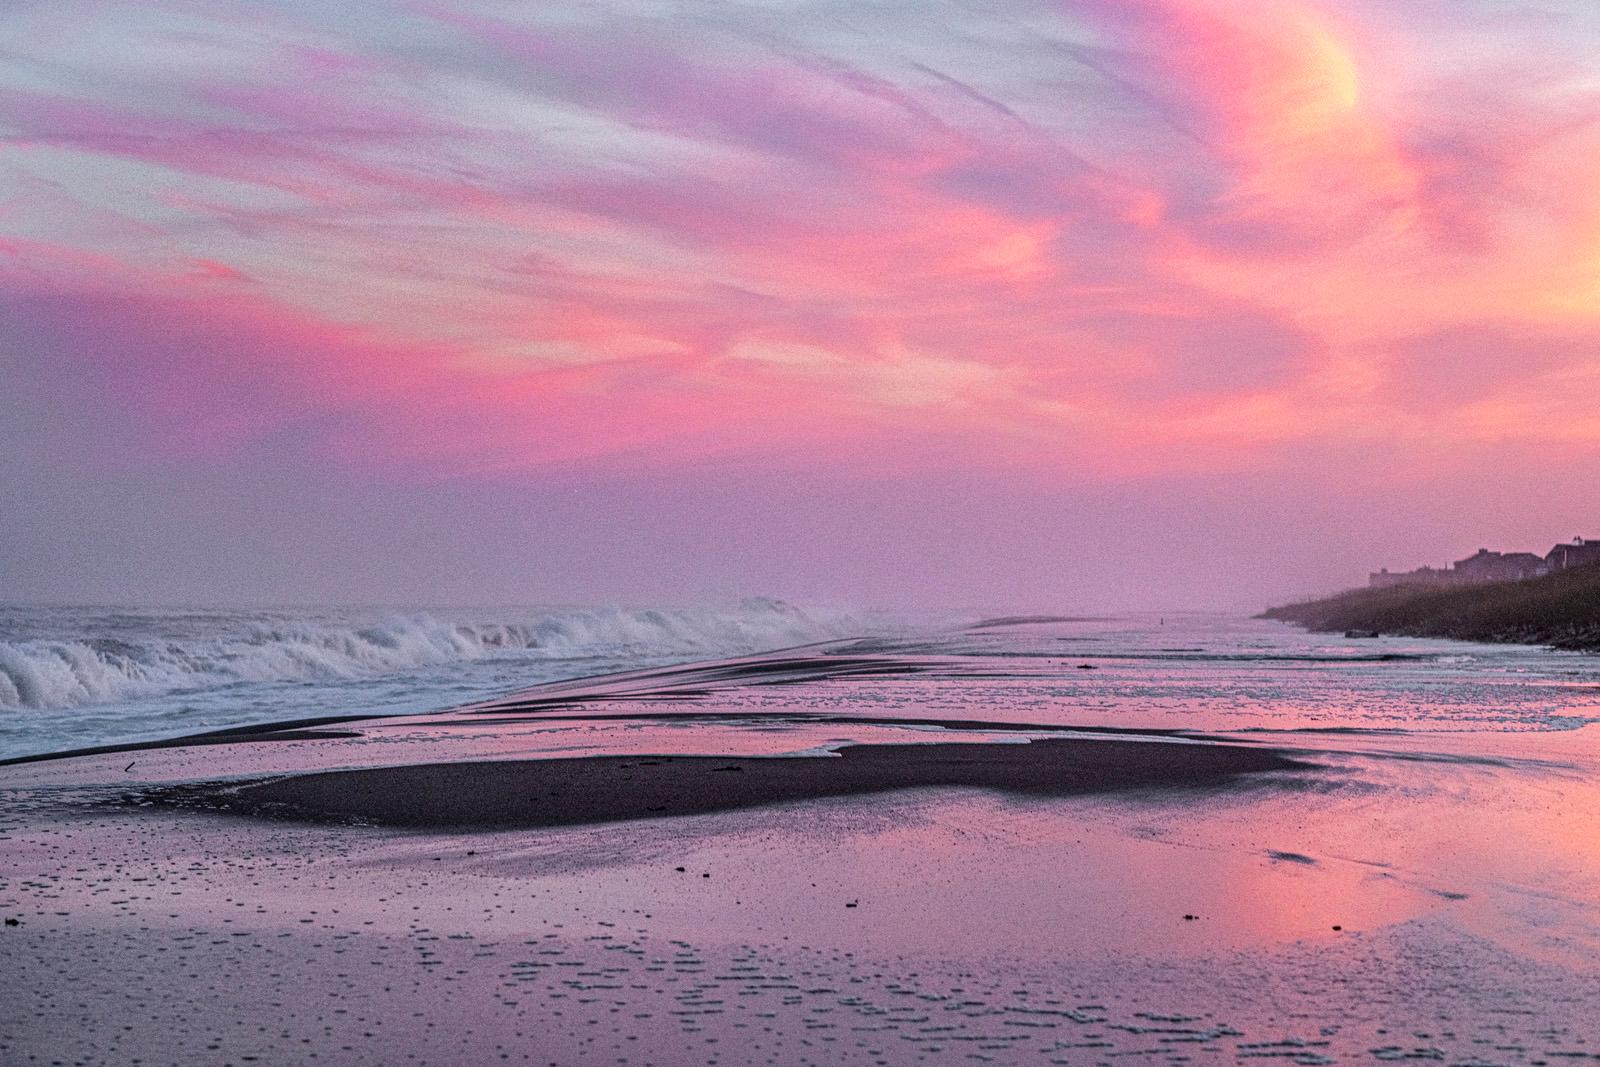 John Mazlish Color Photograph - "Pink Surf 2"- Colorful Photo Shot on the Beach in Early Autumn Dusk 